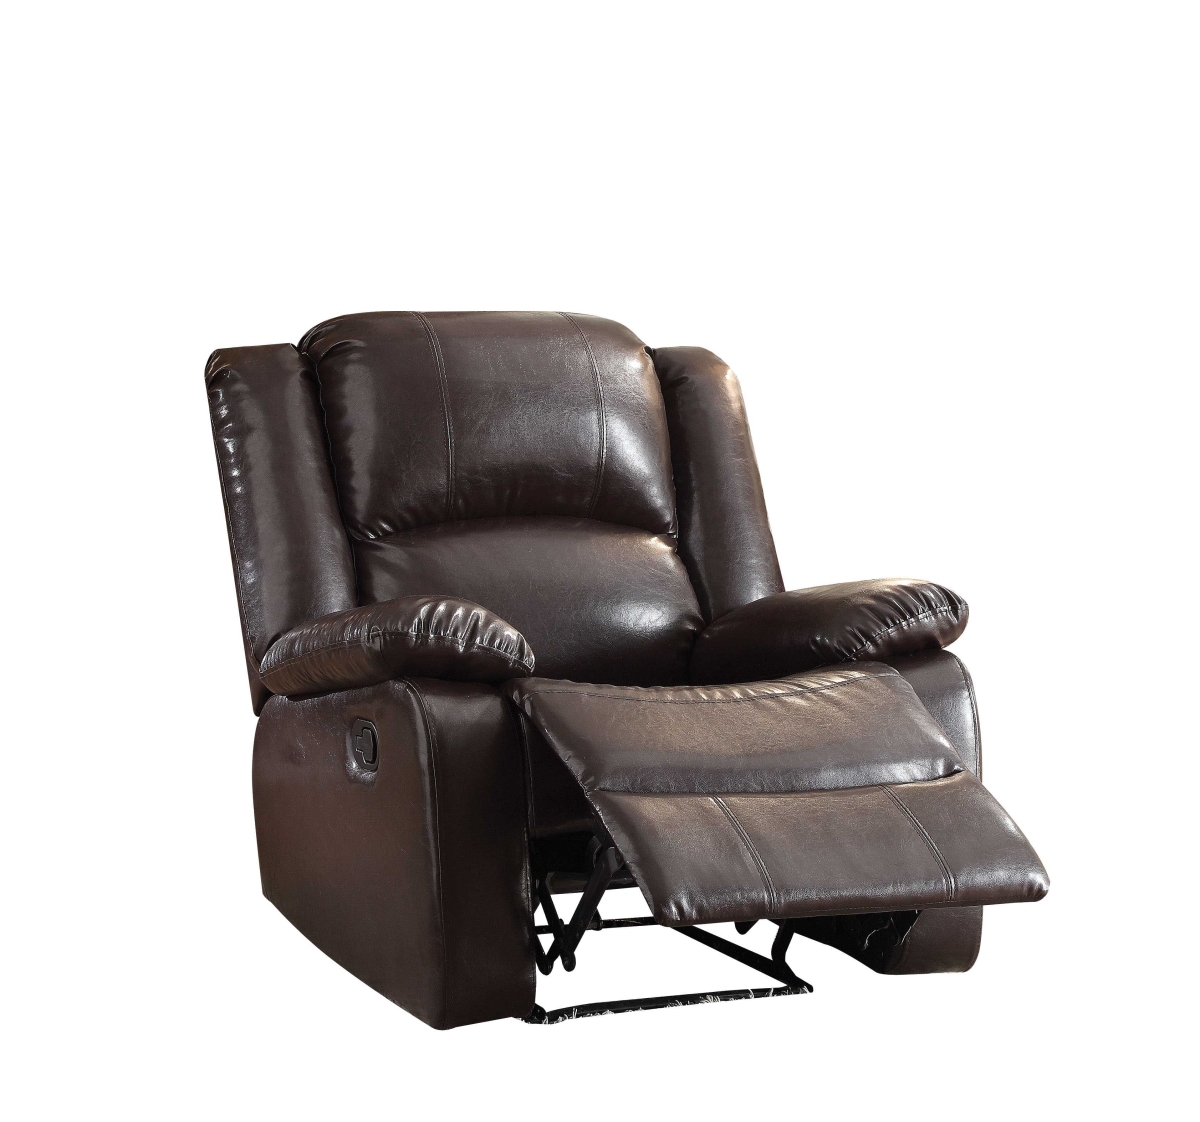 Home Roots Furniture 286171 41 X 36 X 36 In. Wooden Frame Recliner - Espresso